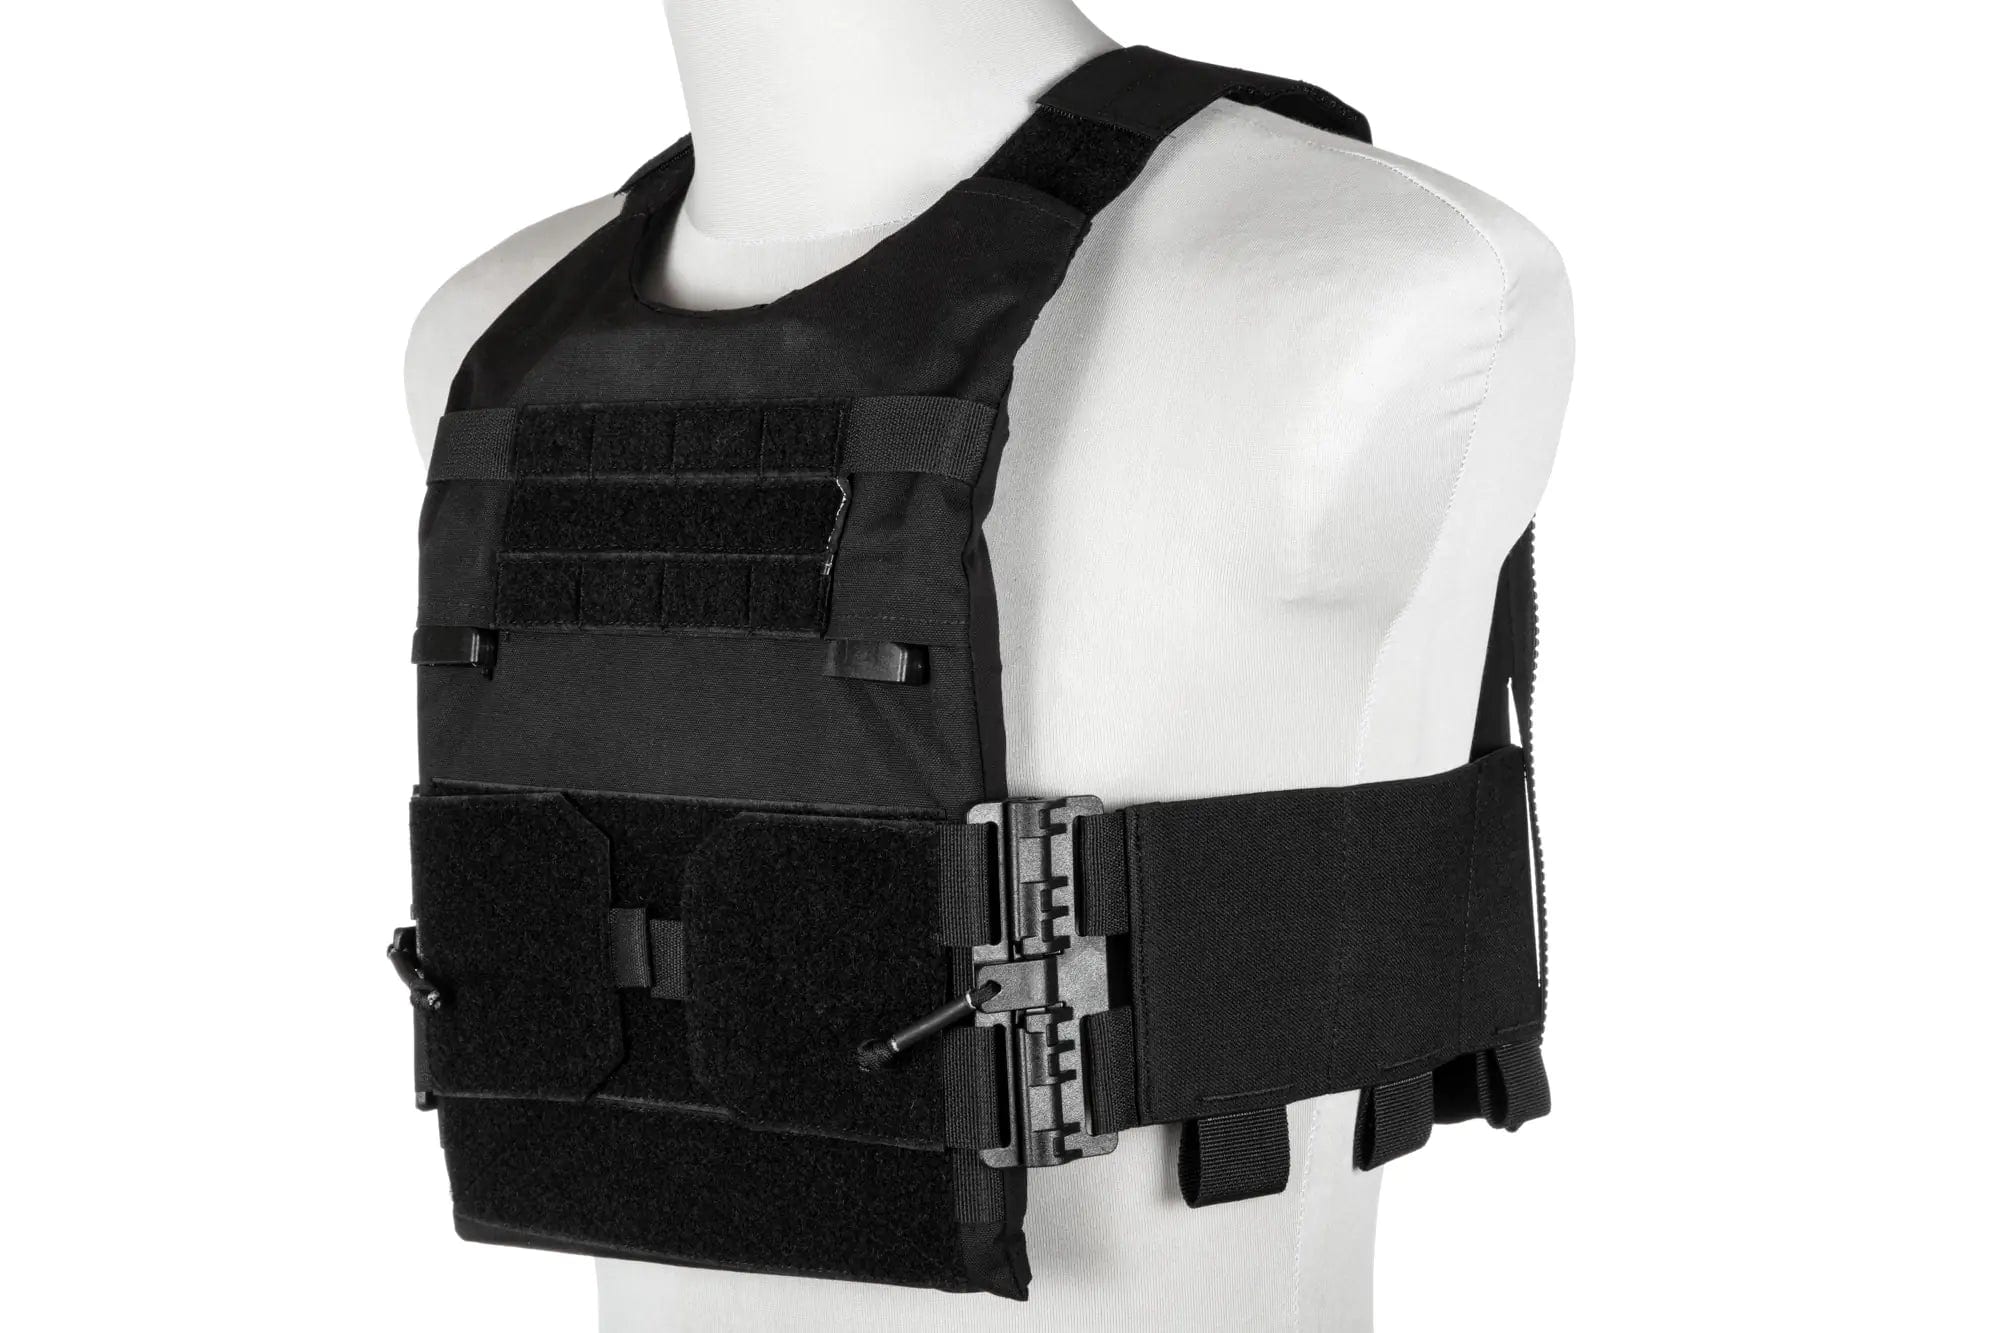 PEW TACTICAL Lv119 overt Plate Carrier